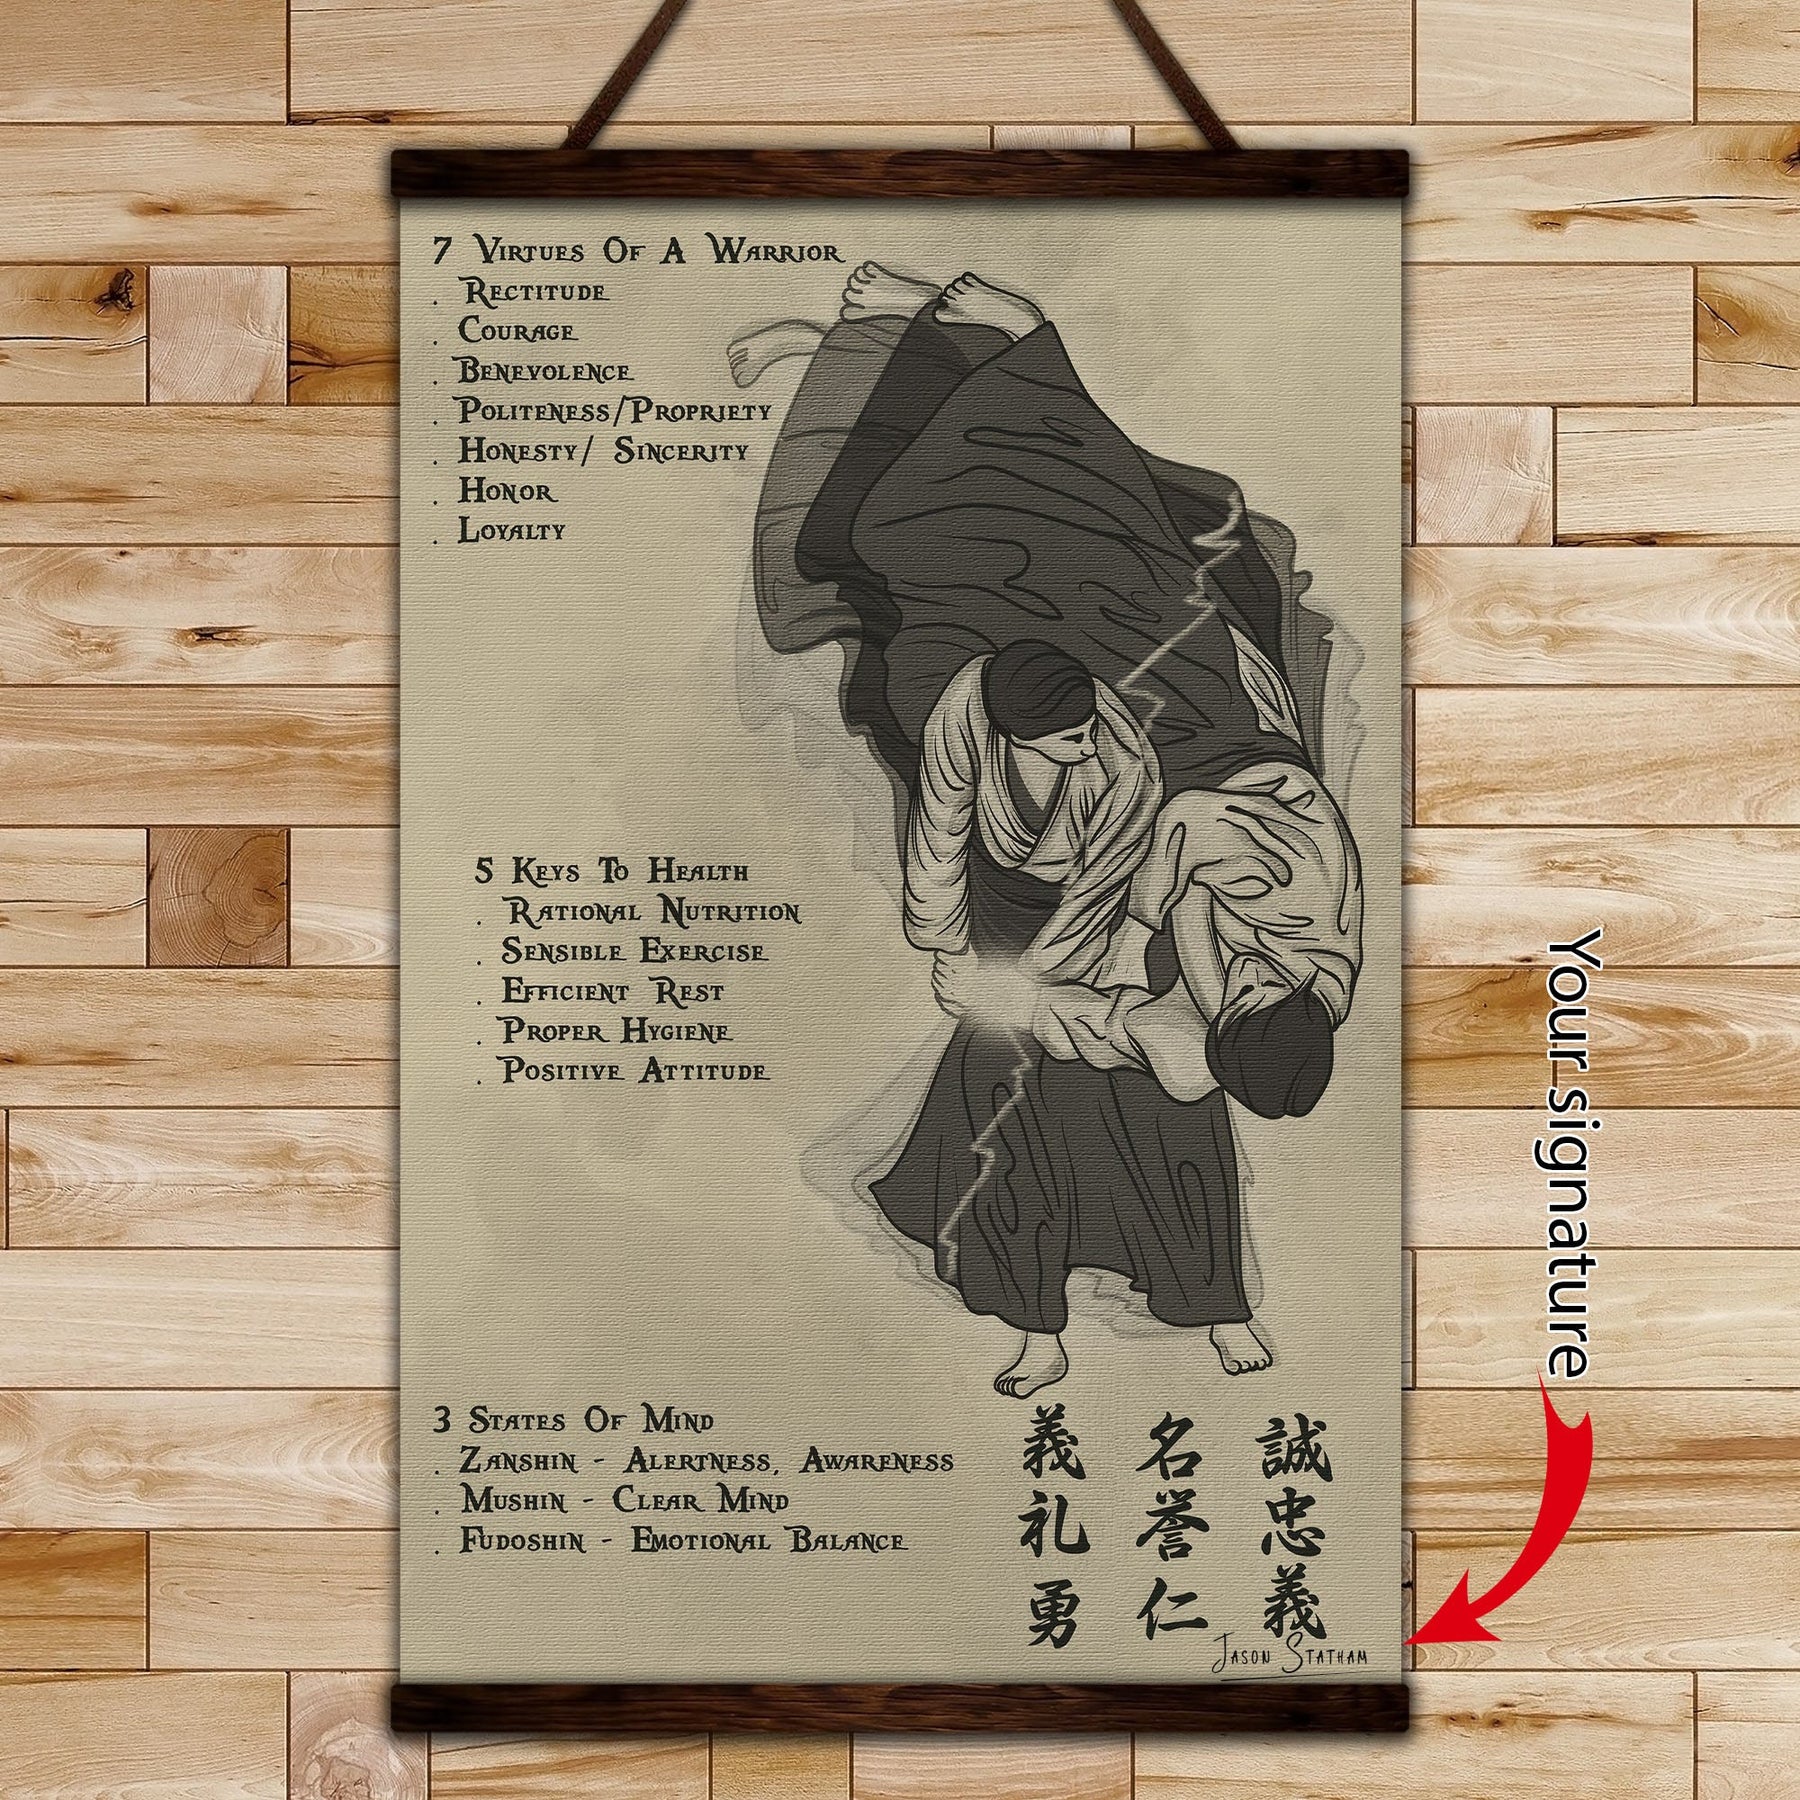 AI006 - 753 CODE - English - Vertical Poster - Vertical Canvas - Aikido Poster